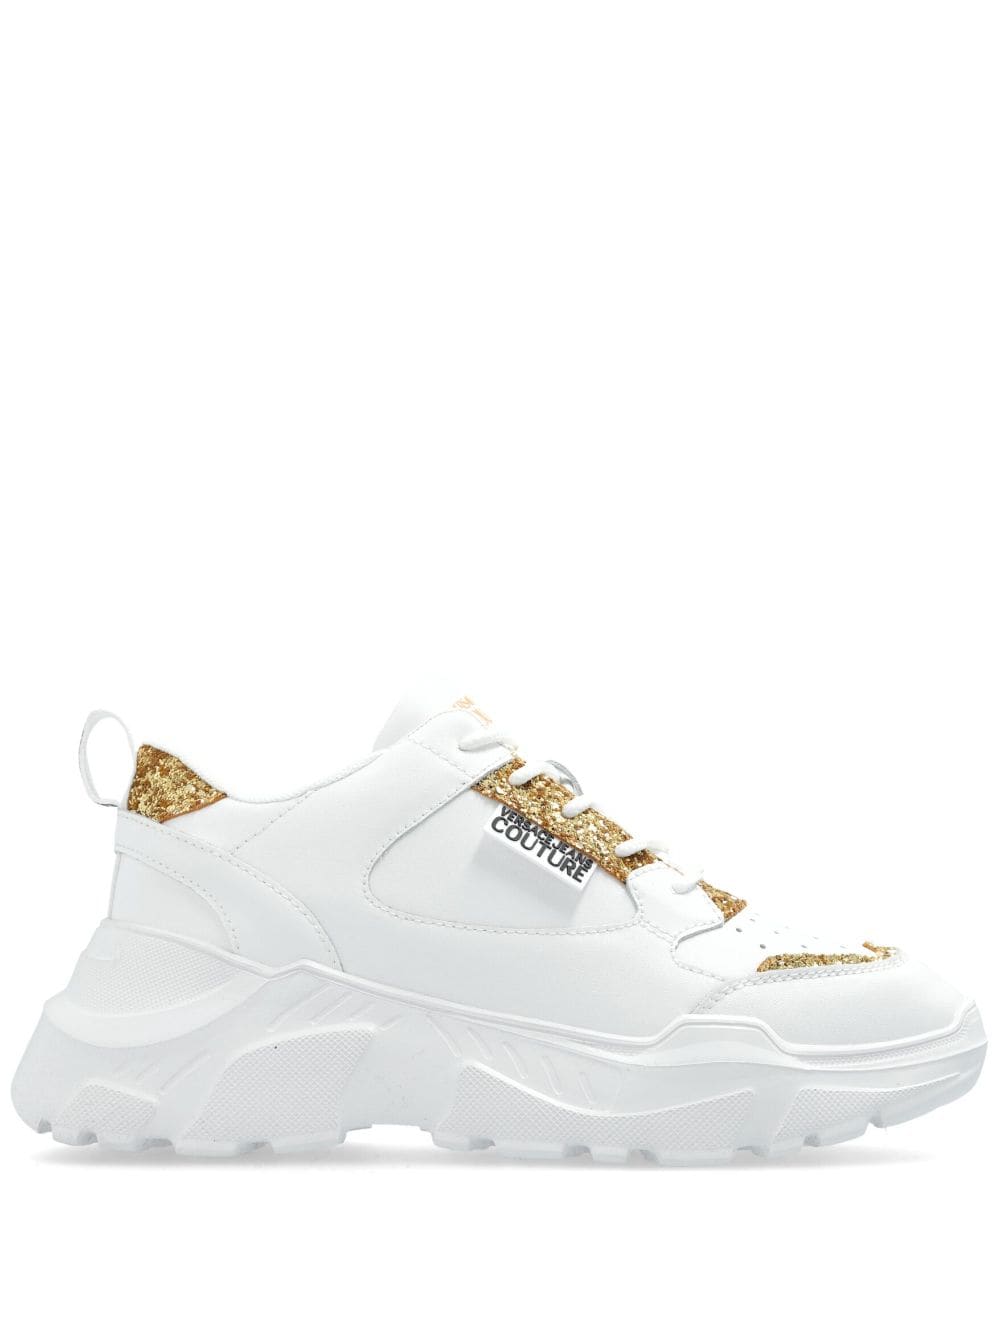 Versace Jeans Couture logo-patch glitter-detailing sneakers - White von Versace Jeans Couture